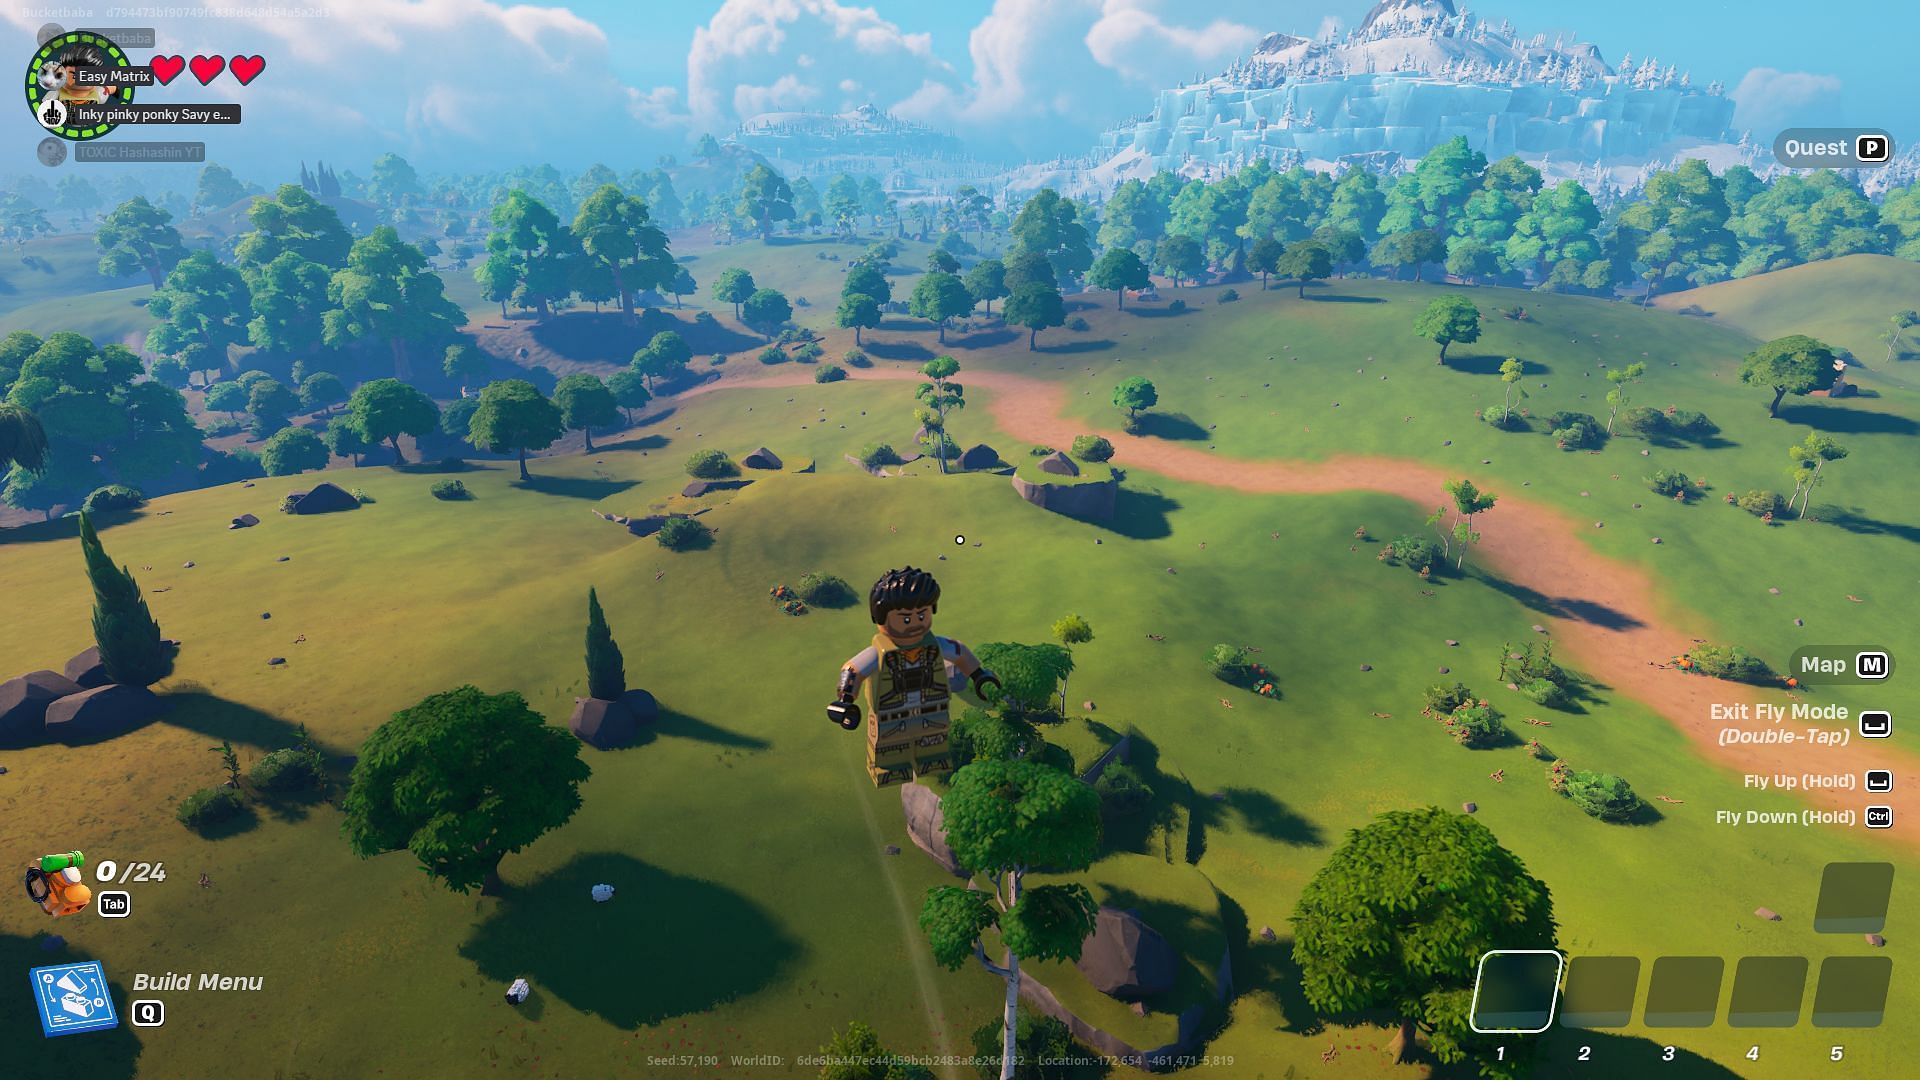 A preview of the seed 57190 (Image via Epic Games)